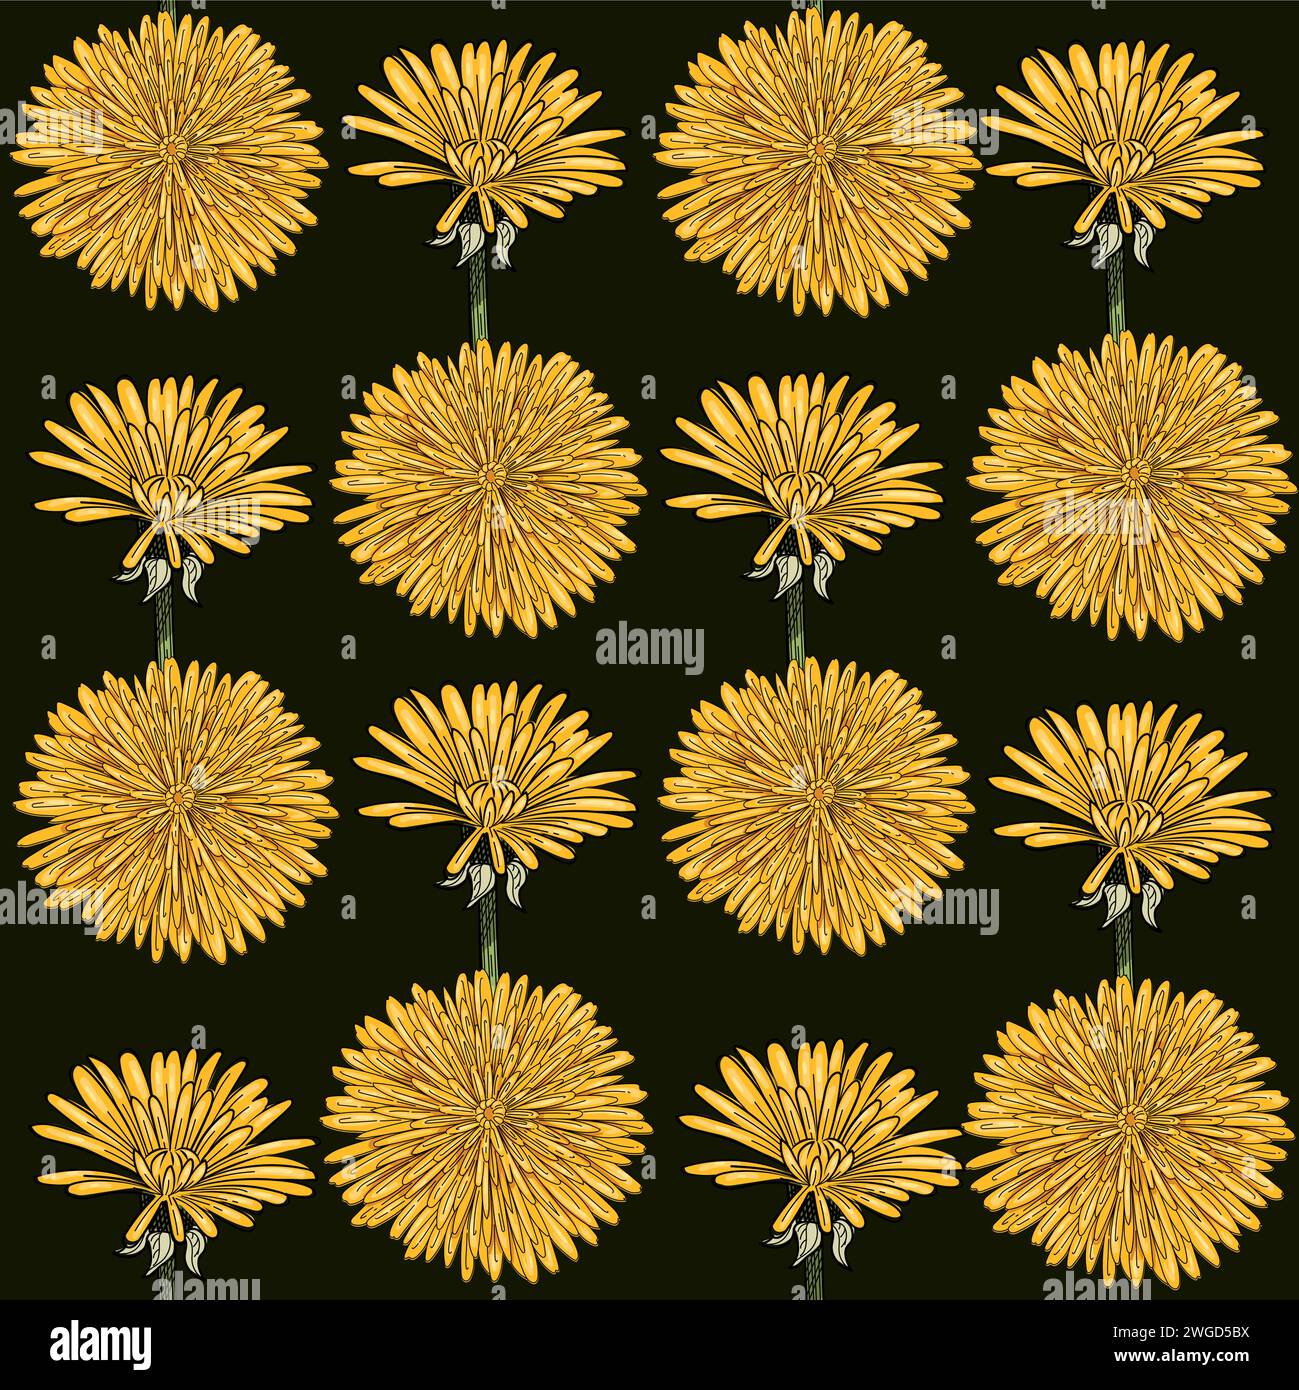 Seamless pattern dandelion flower head hand drawn colorful sketch for drawing book vector illustration on brown background Stock Vector